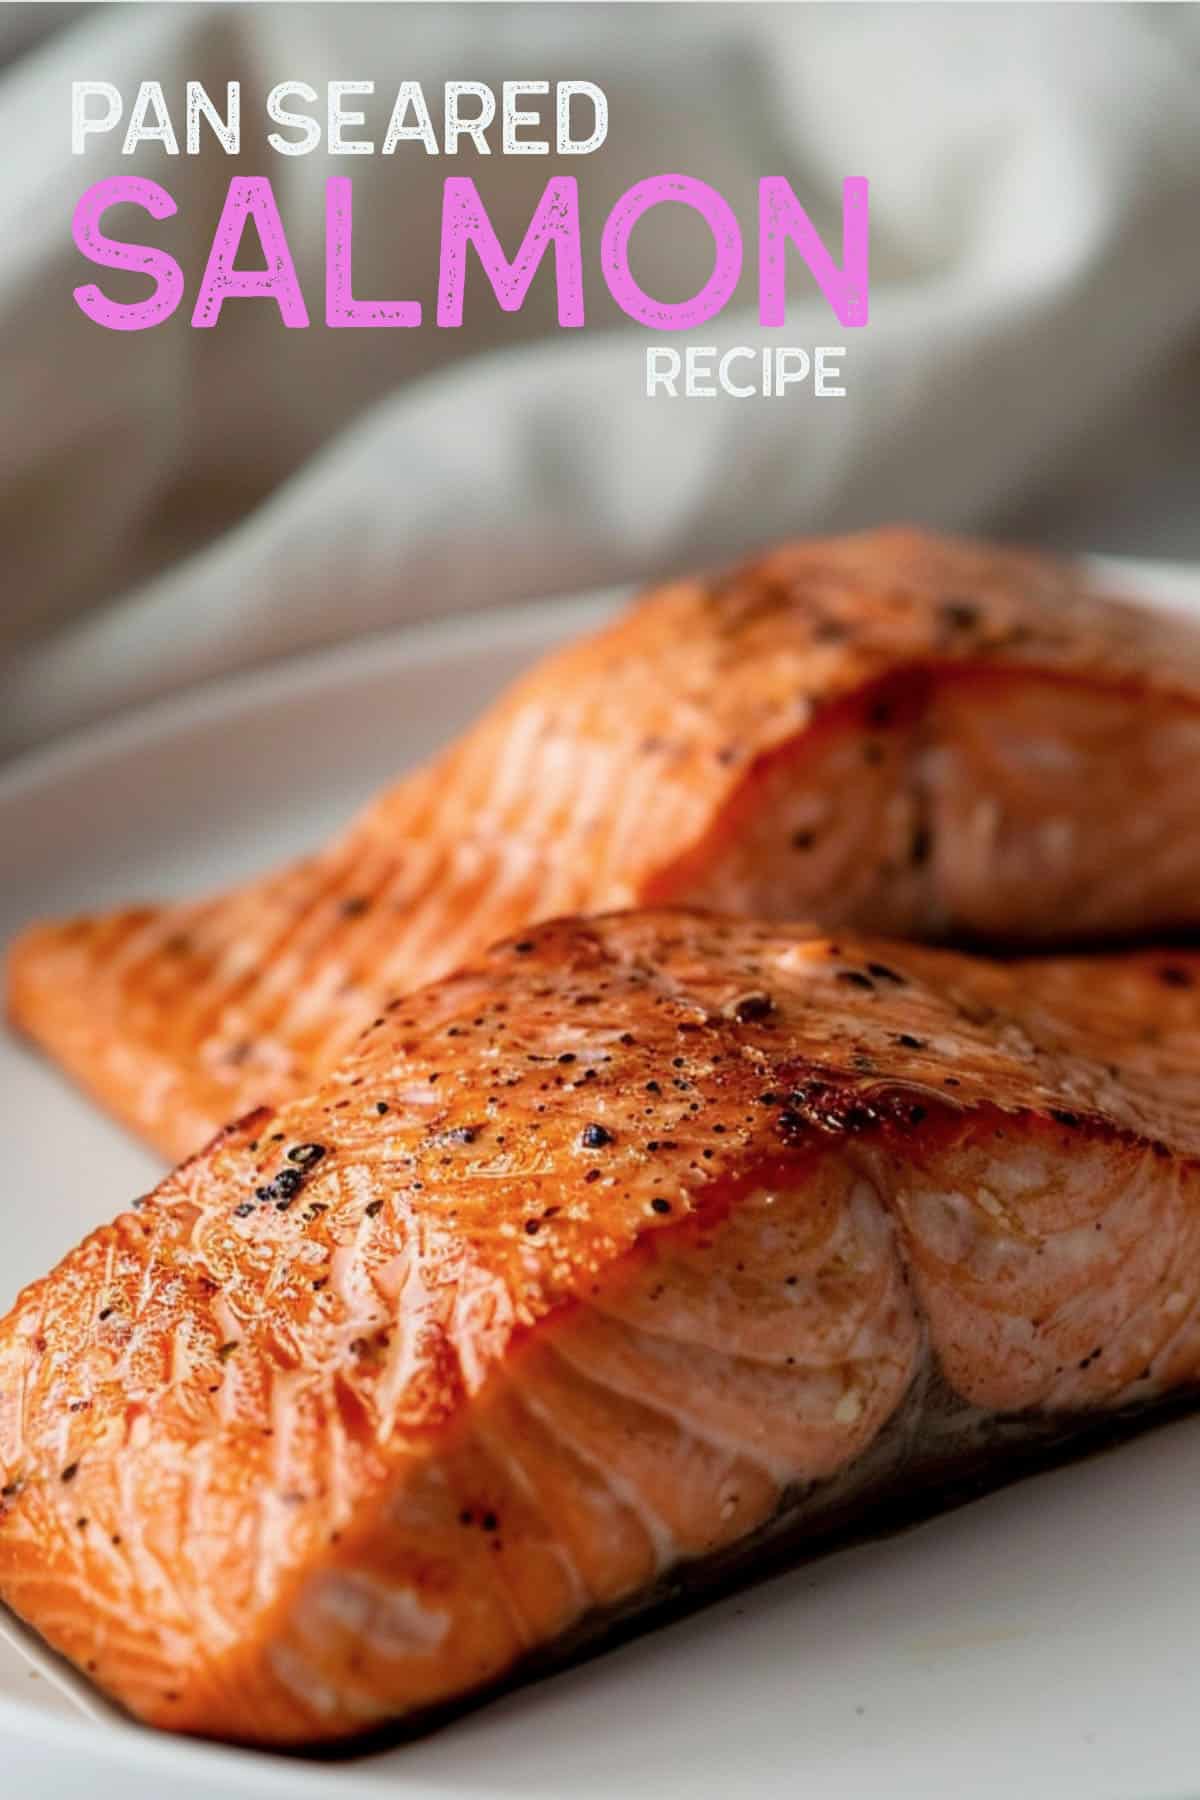 Image of a pan-seared salmon fillet with crispy golden-brown skin, resting on a plate.